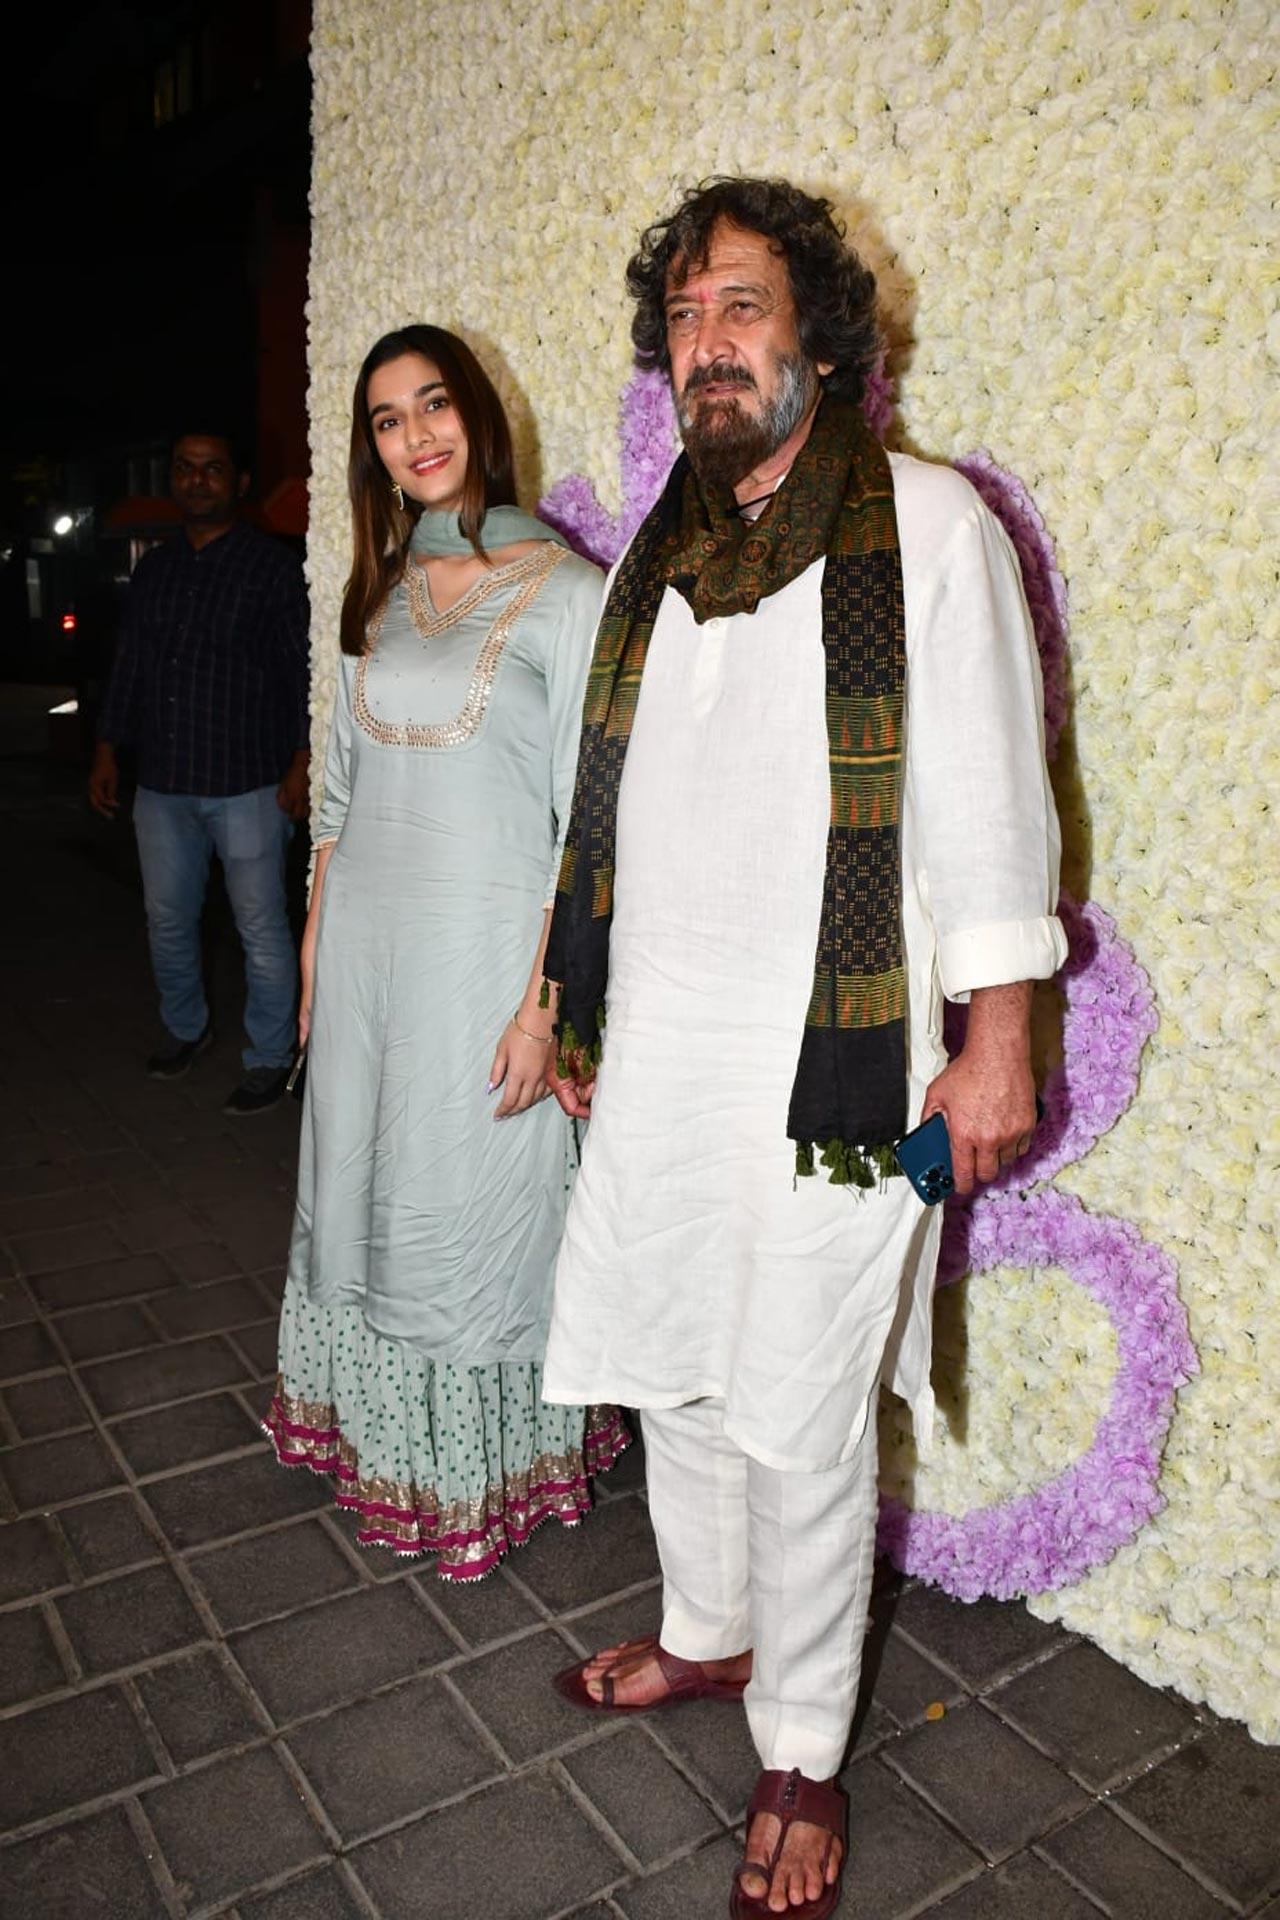 Saiee Manjrekar and her father Mahesh Manjrekar, who is good friends with Salman Khan, also attended the festive celebration